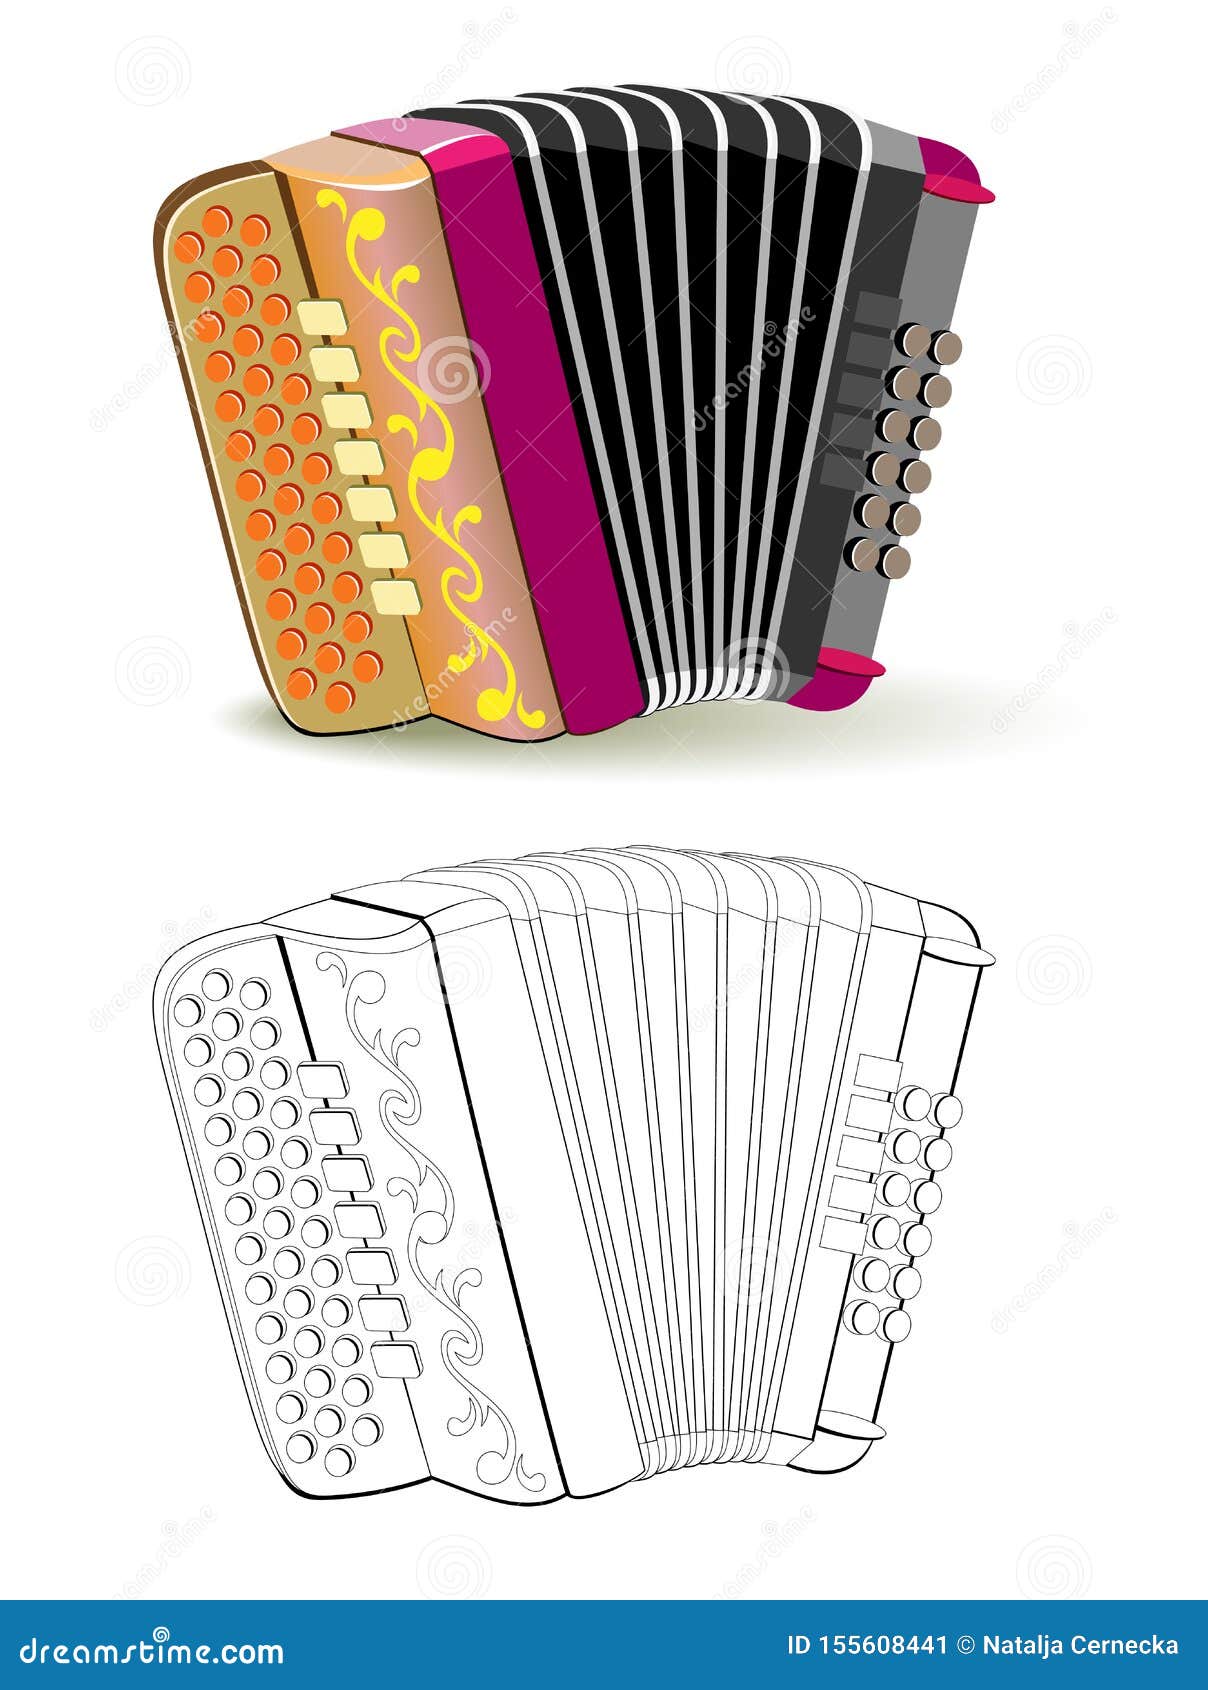 Colorful and Black and White Pattern for Coloring. Fantasy Illustration of  Musical Instrument French Button Accordion Stock Vector - Illustration of  acoustic, activity: 155608441